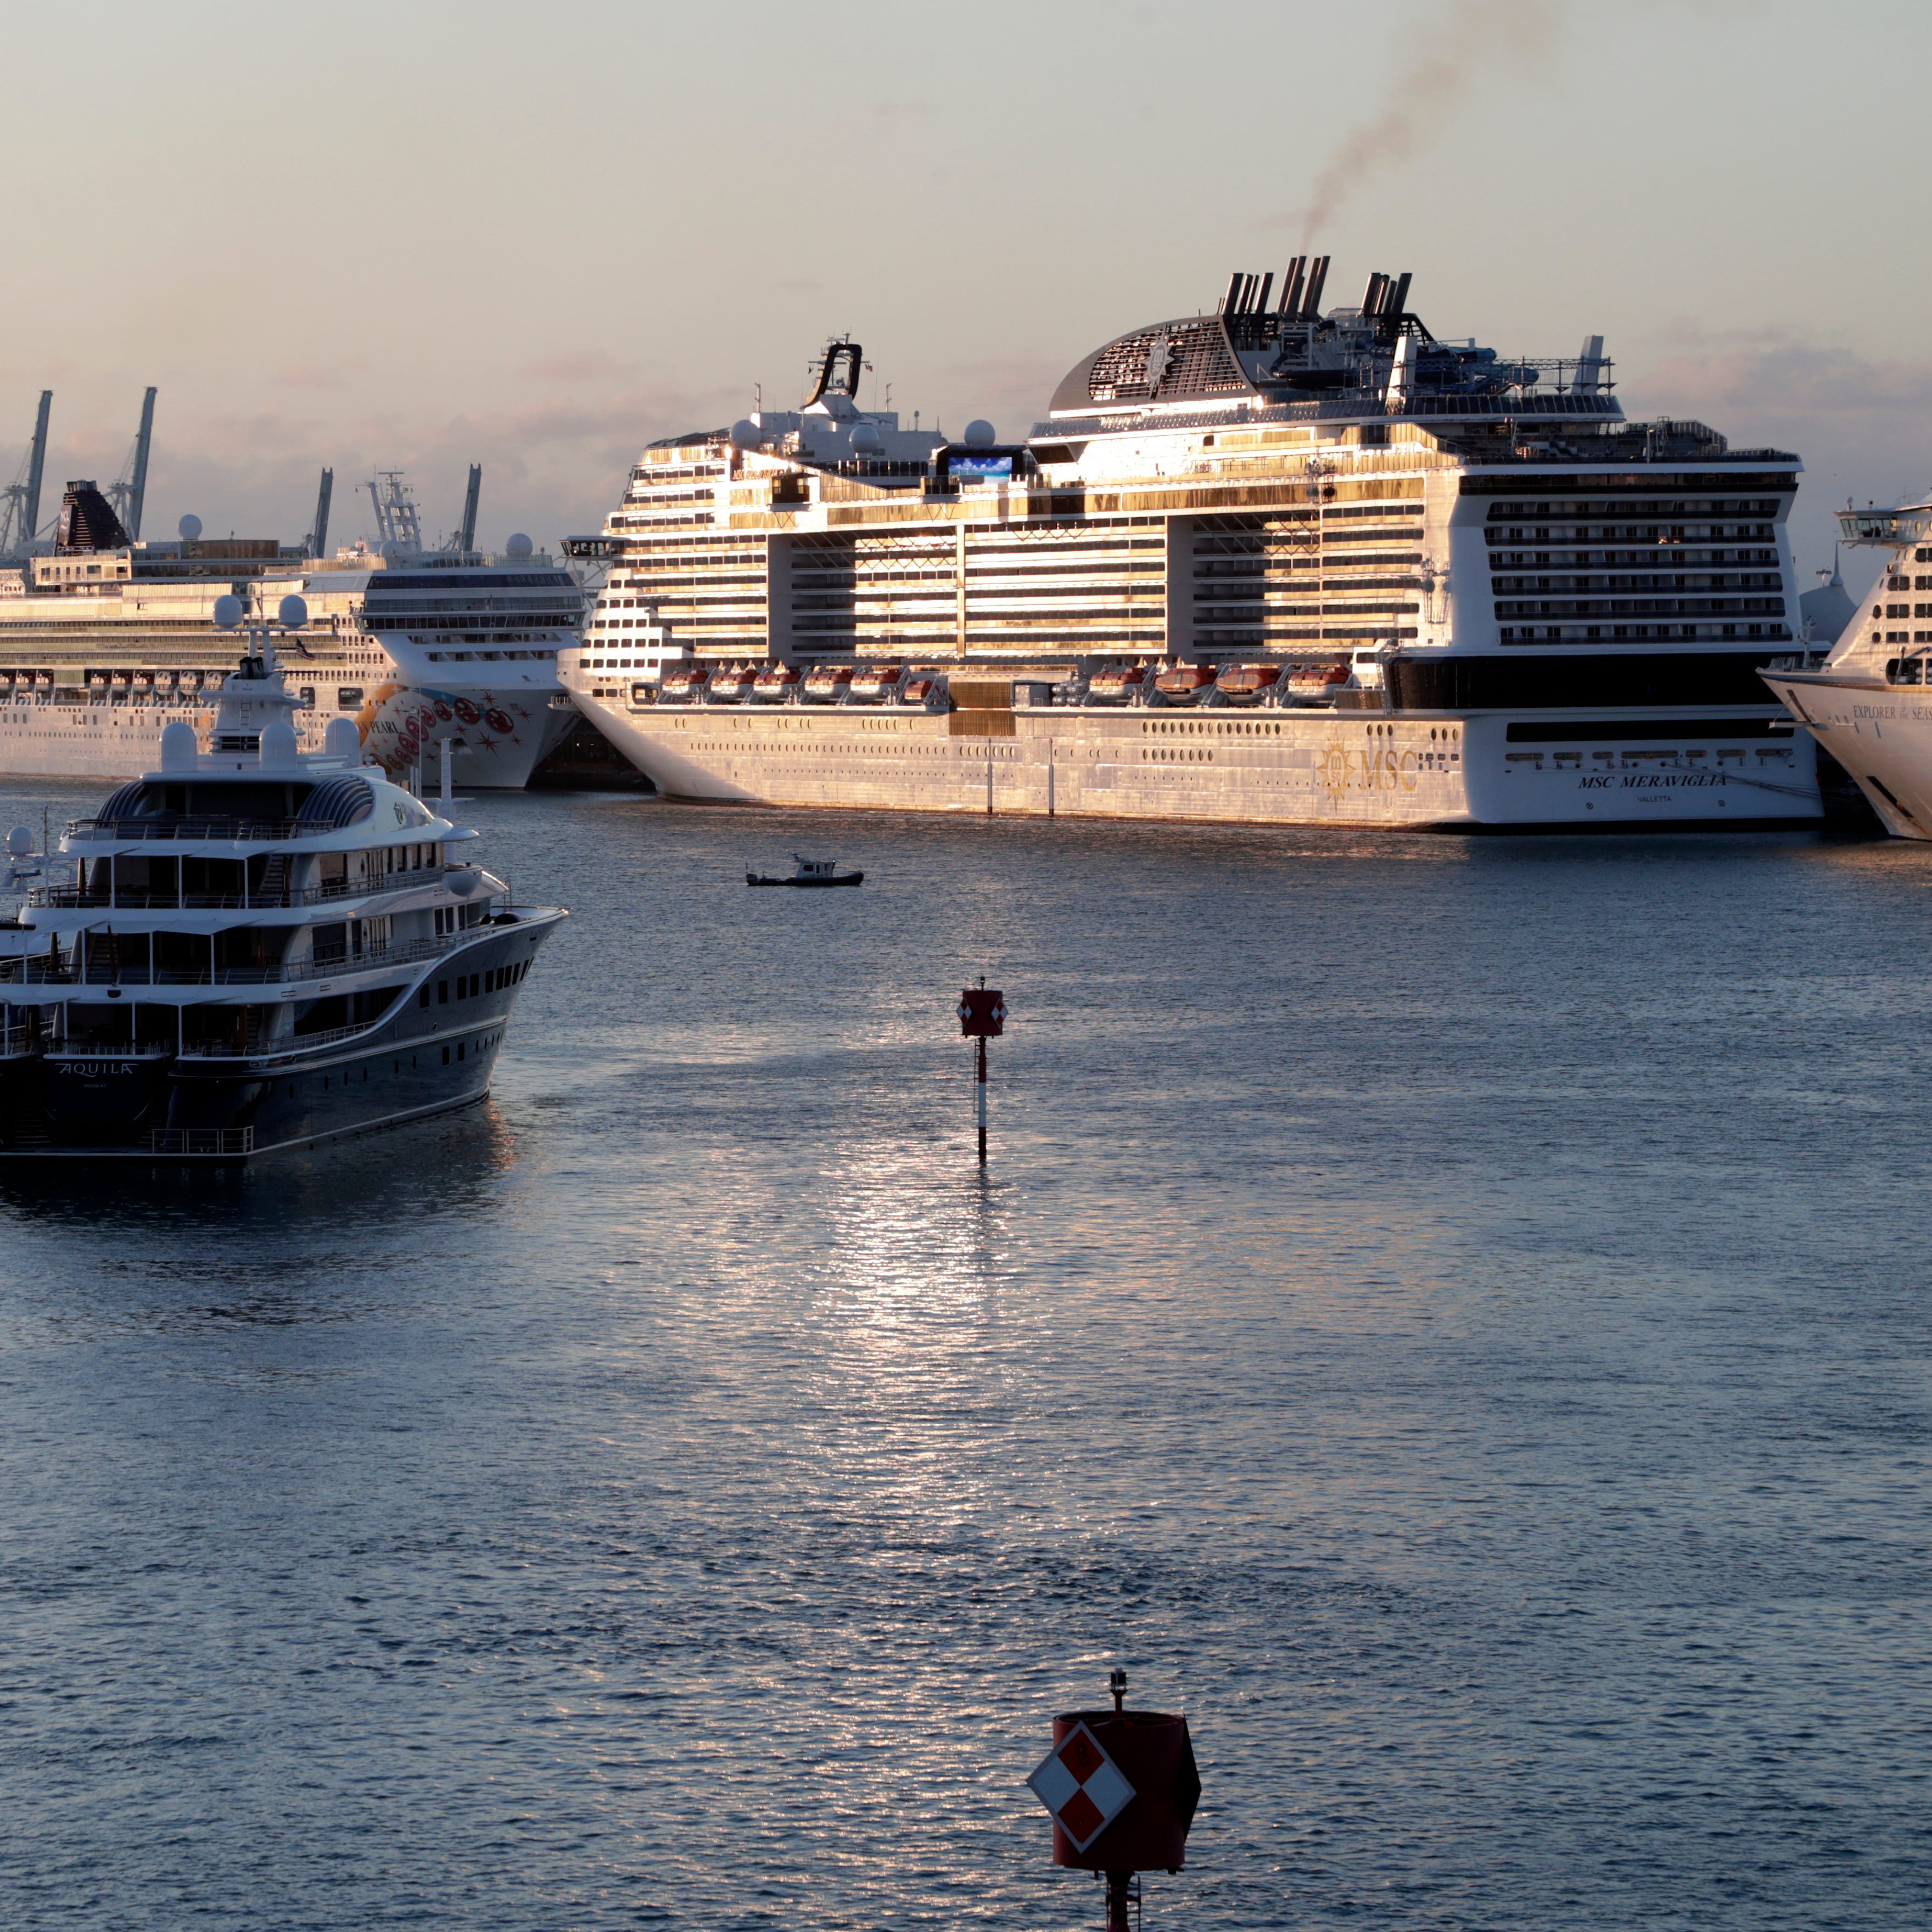 MSC Meraviglia, right, is docked with other ships at PortMiami, Sunday, March 15, 2020, in Miami Beach, Fla.